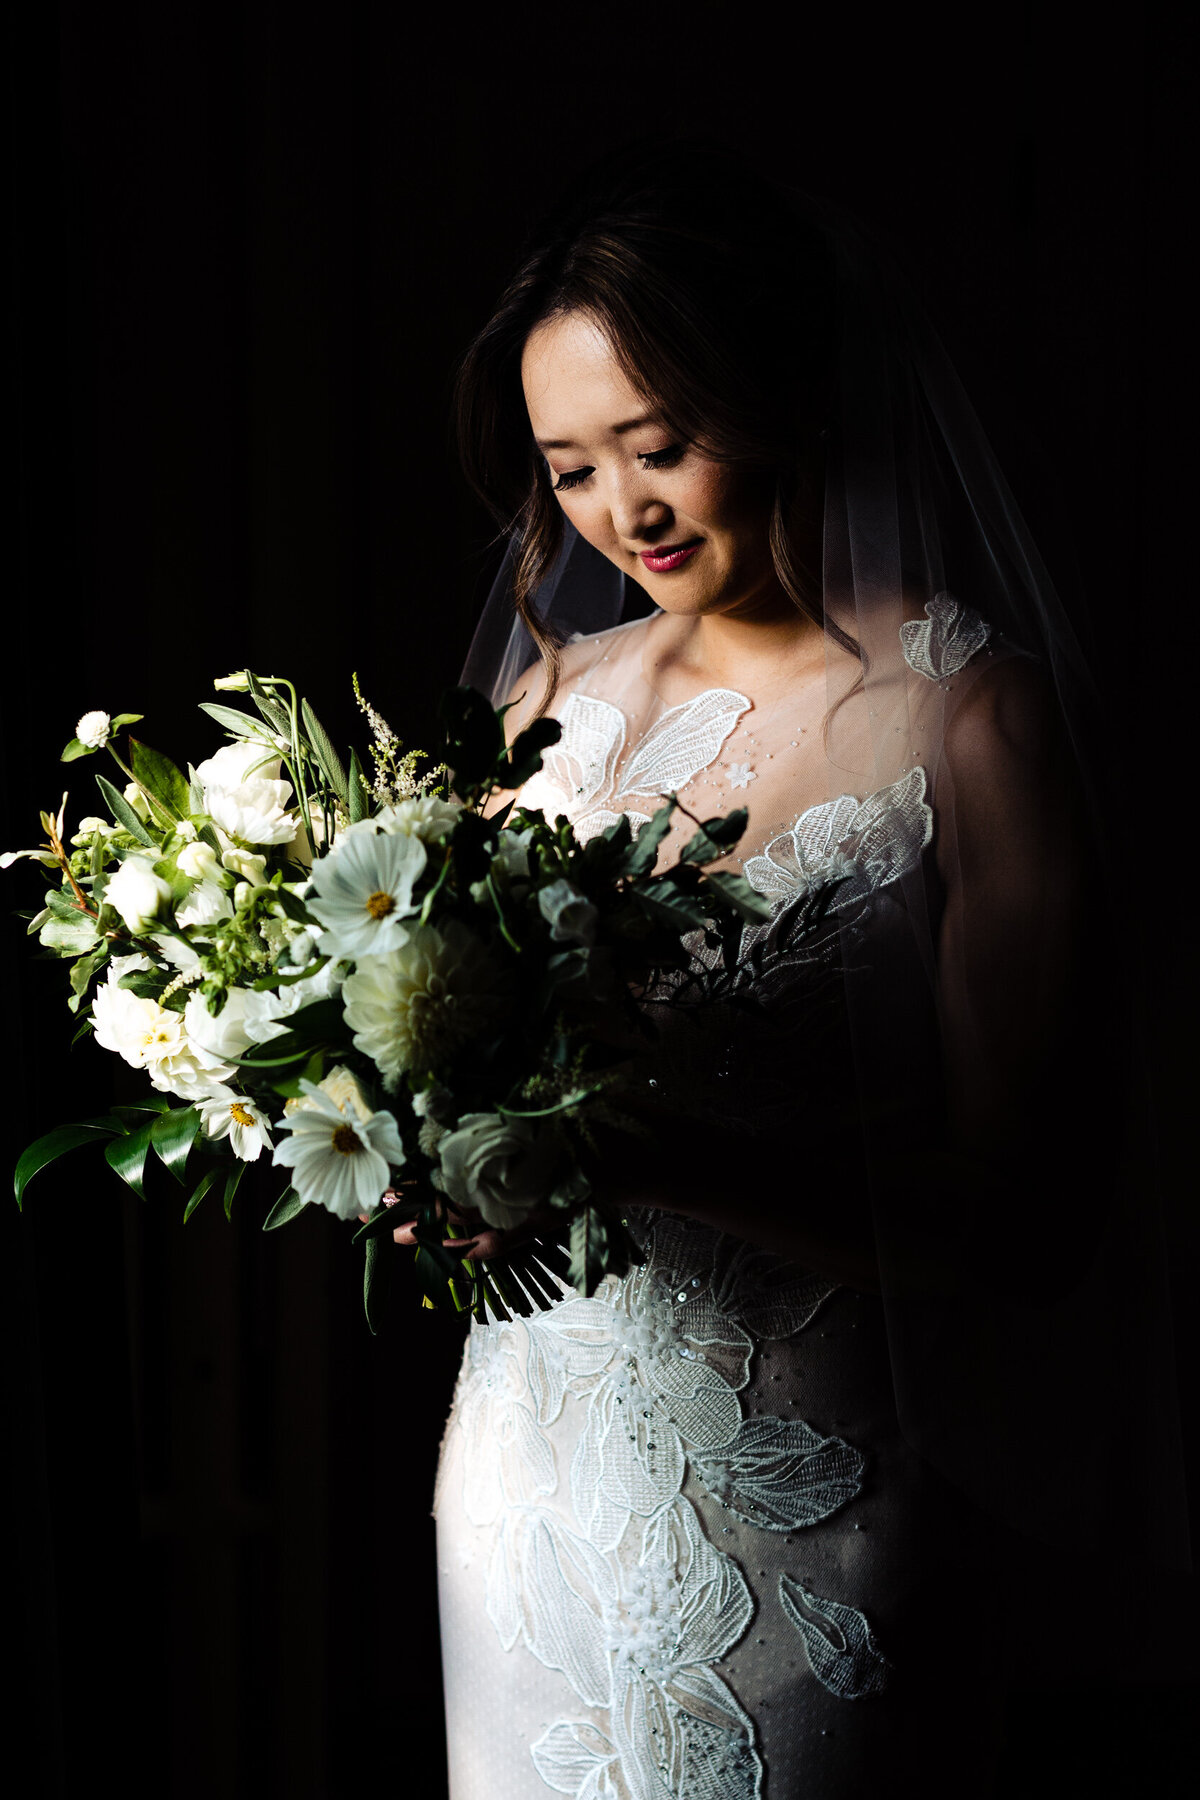 One of the top wedding photos of 2021. Taken by Adore Wedding Photography- Toledo, Ohio Wedding Photographers. This photo is of a bride taking a moment before her wedding